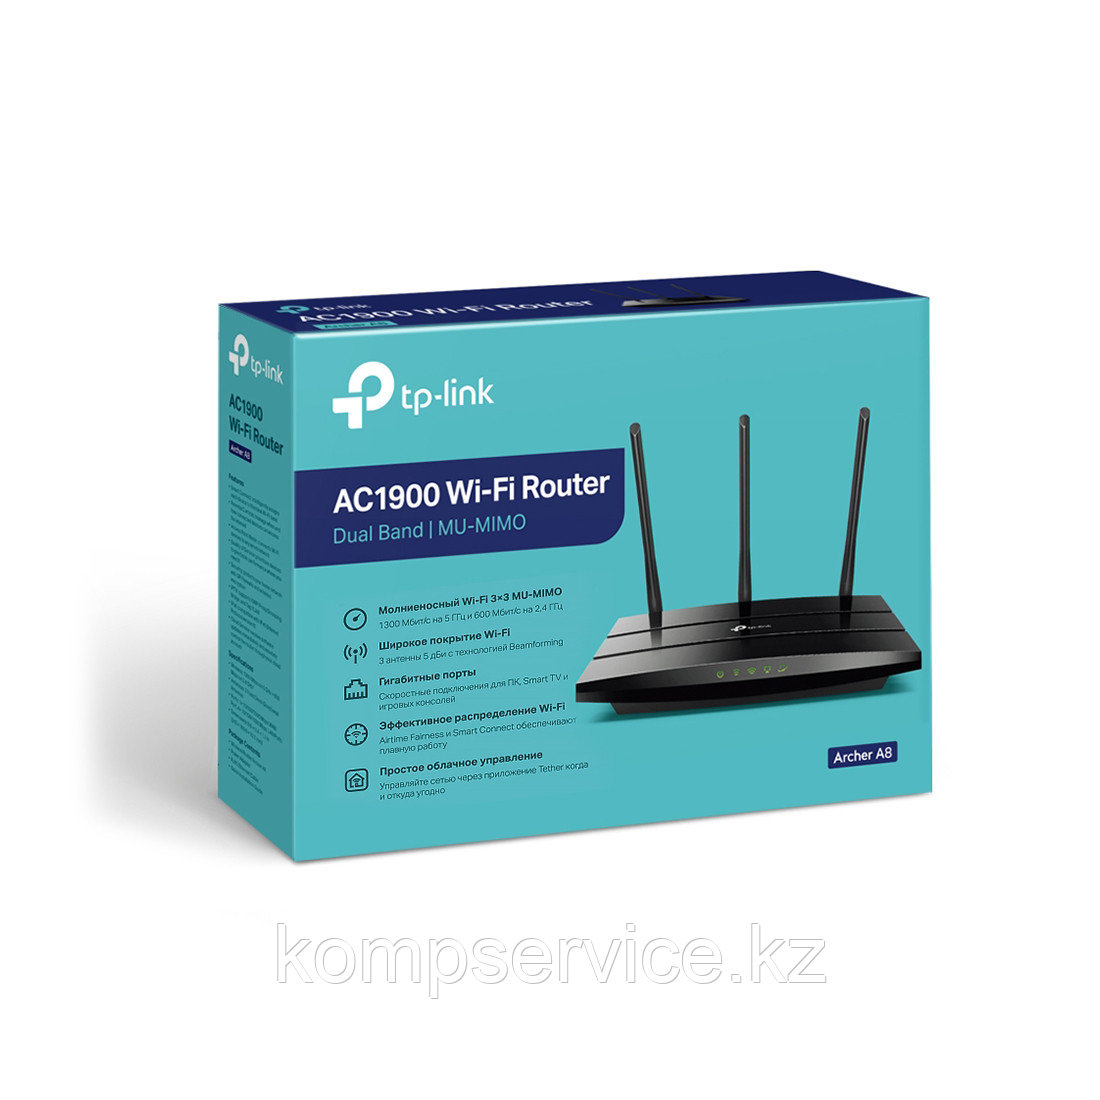 Маршрутизатор TP-Link Archer A8 - фото 3 - id-p111636389